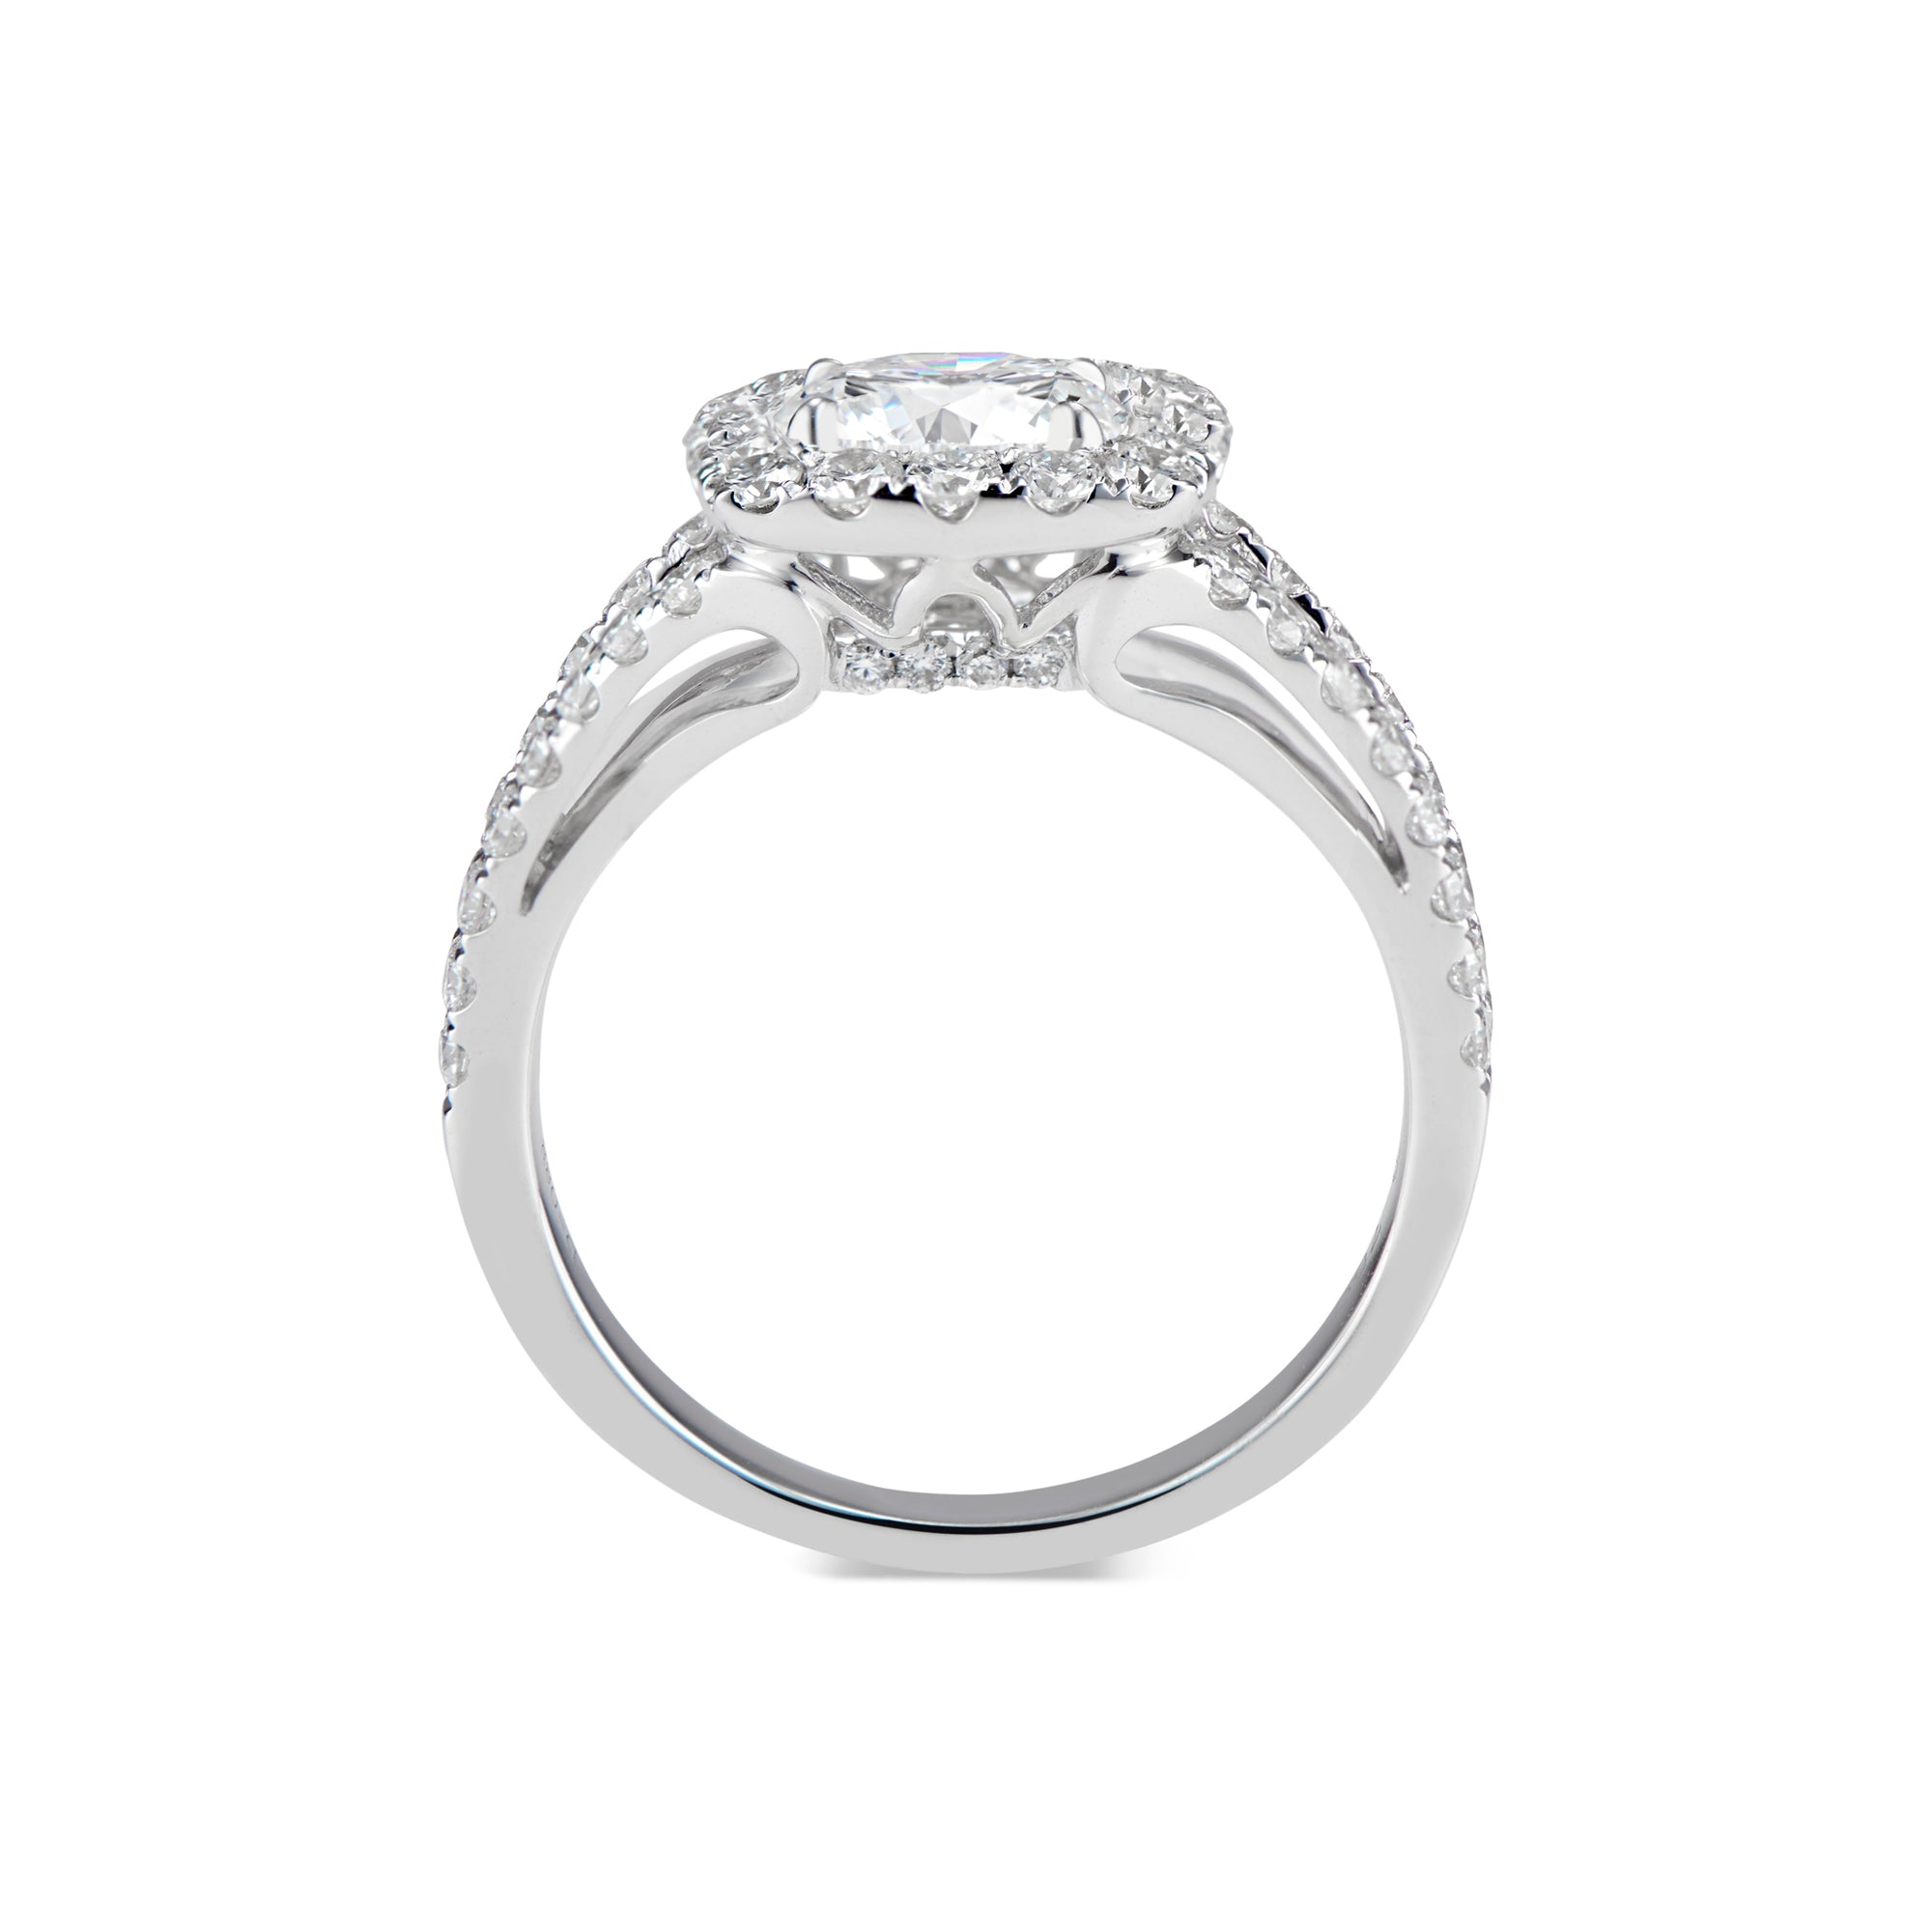 Cushion Halo Diamond Engagement Ring with Split Shank  -18K Weighting 5.28 GR  - 58 round diamonds totaling 0.88 carats